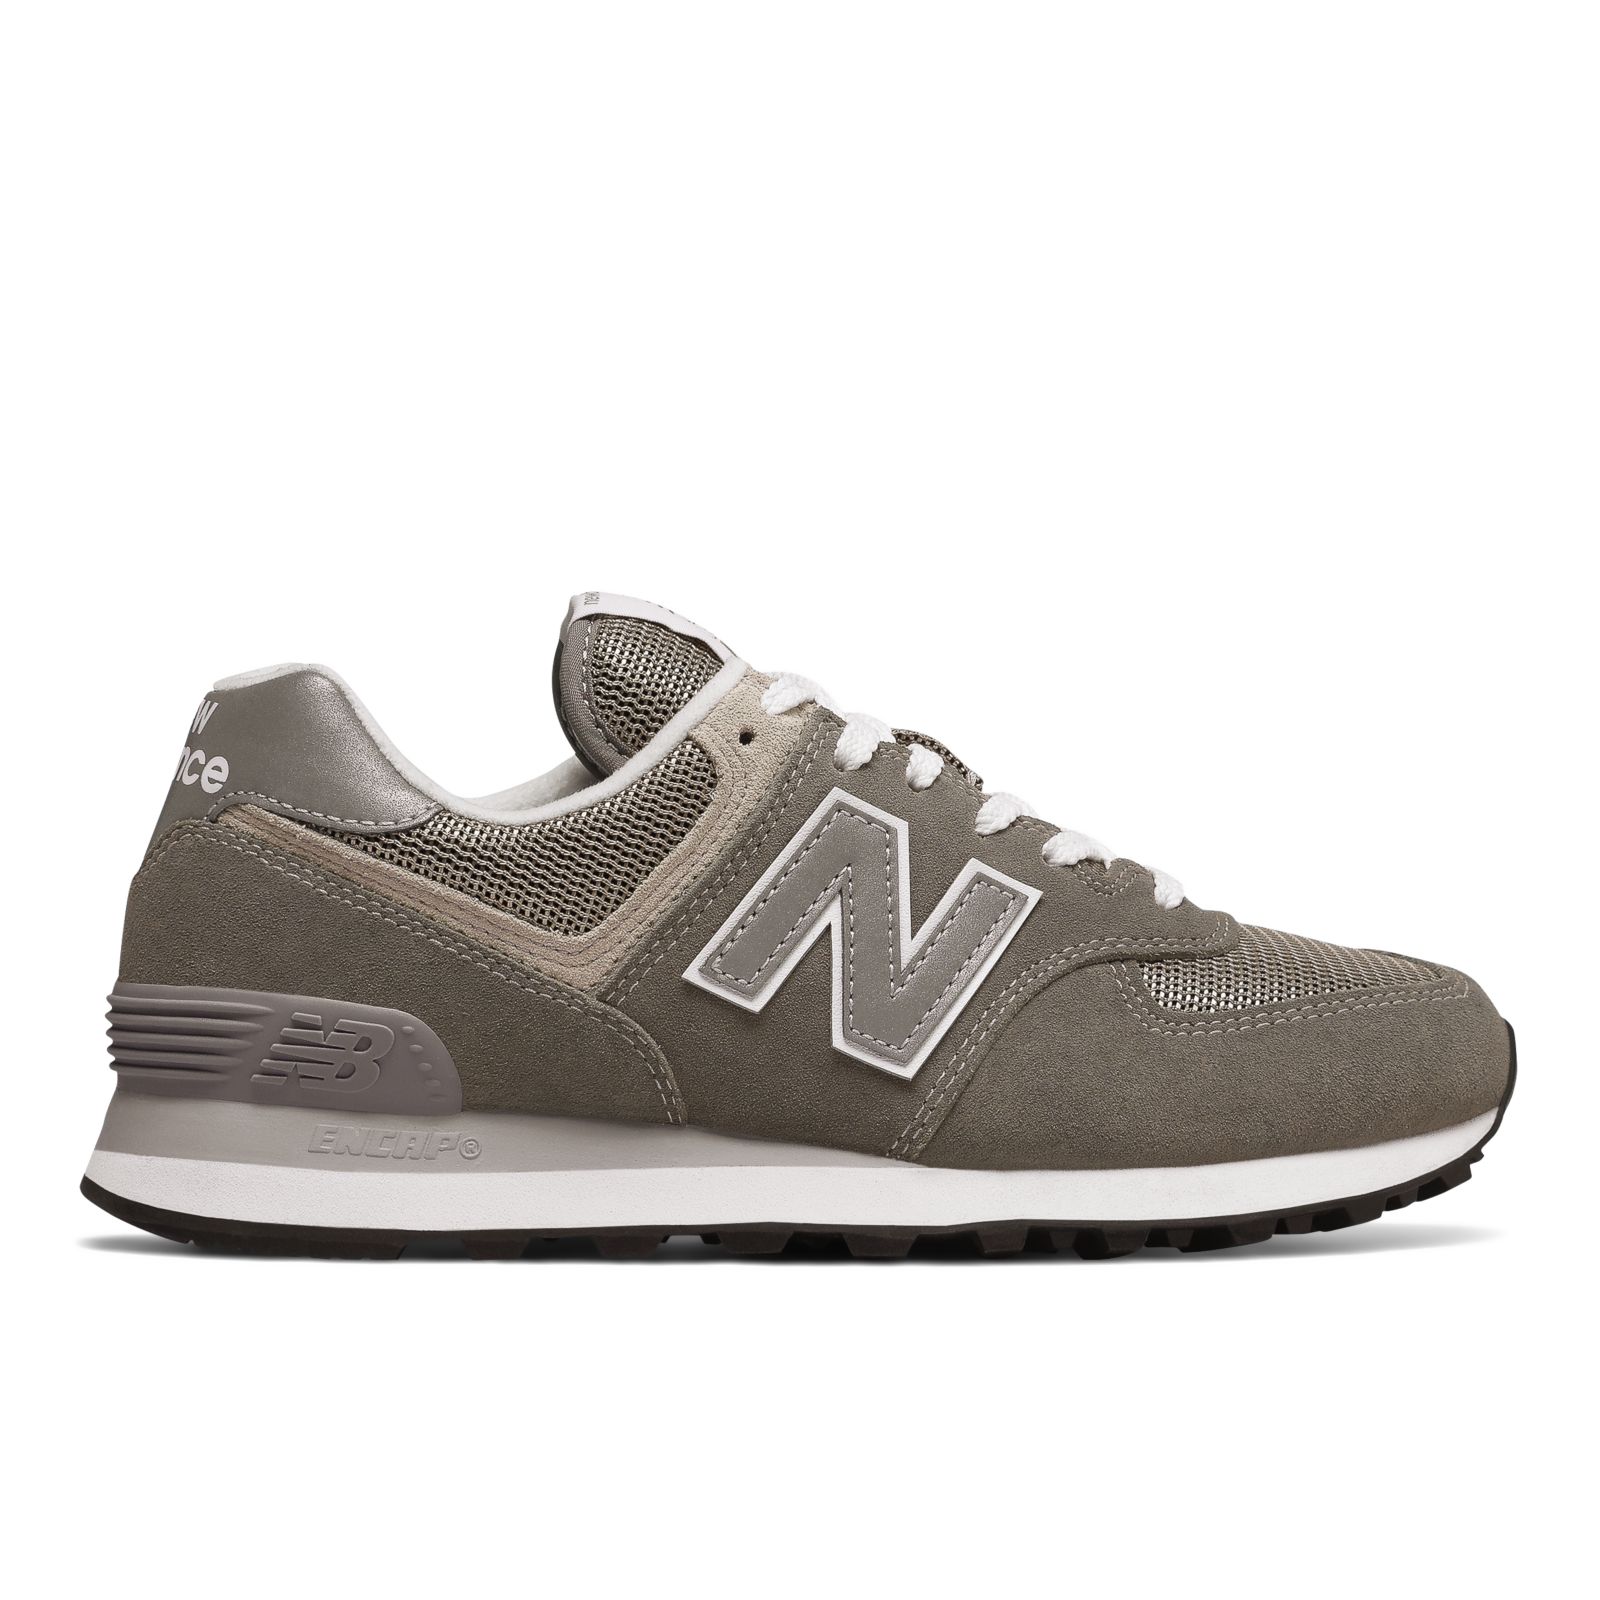 574 Nb - New Balance 574 Ml574fne 83 00 Sneaker Peeker - Always debuting new colors and themes for men, women and children, this sneaker continues to reign supreme over street style.